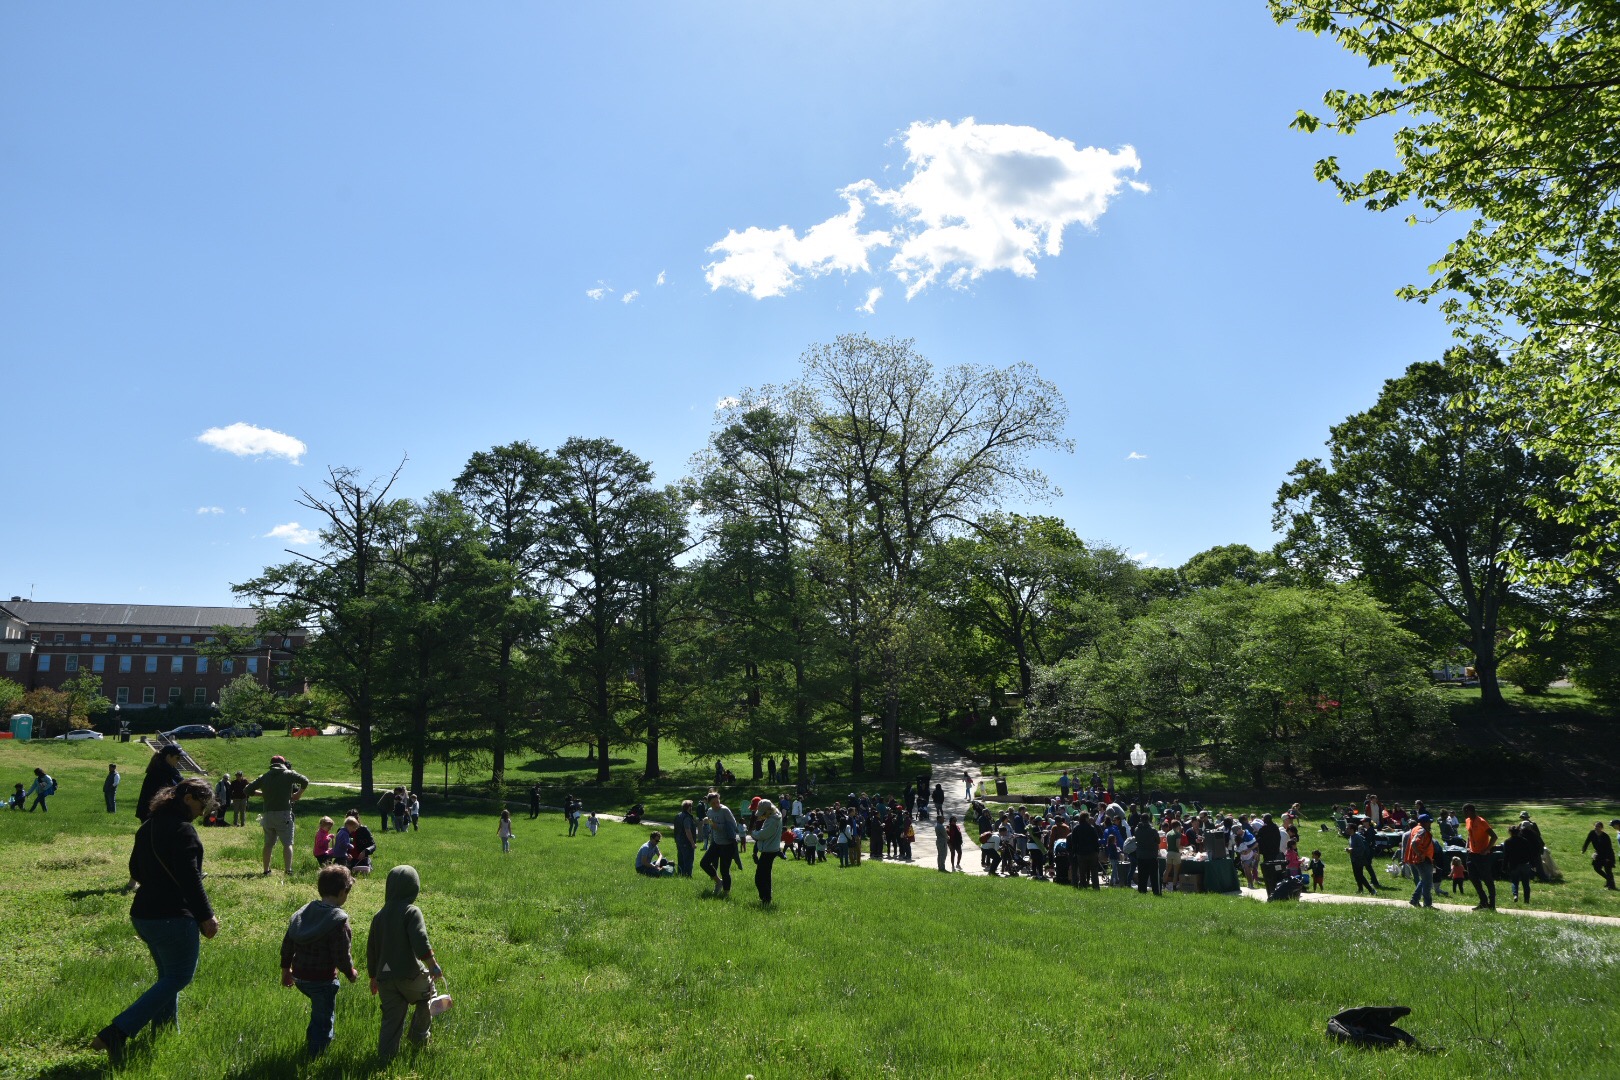 The Great Lawn with a crowd of people.